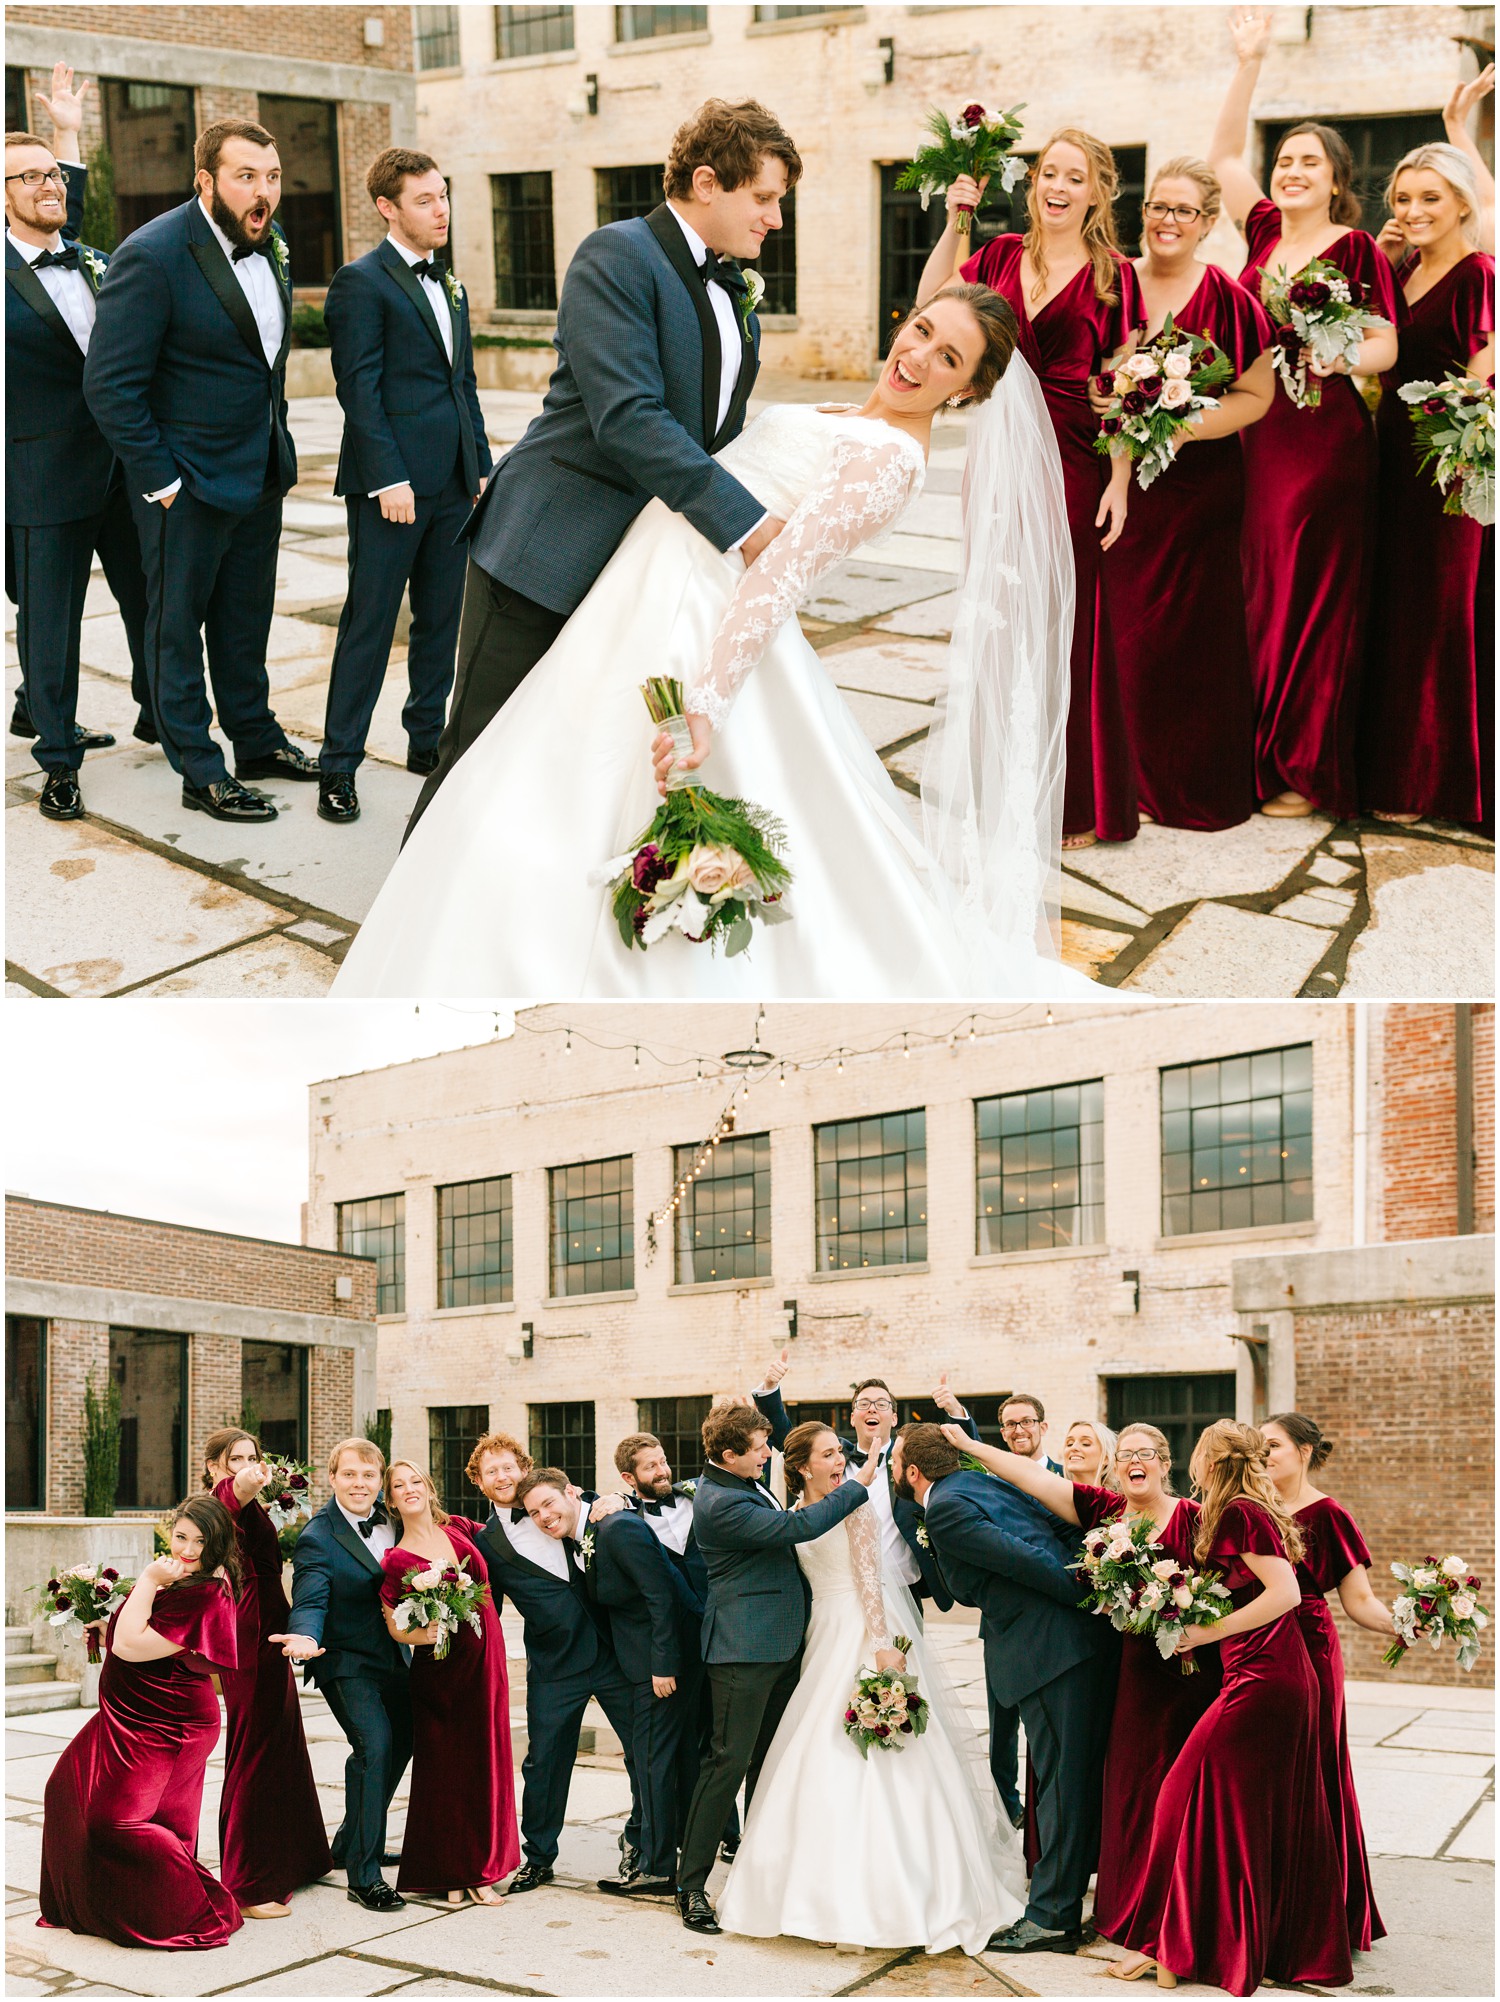 Cadillac Service Garage bridal party portraits by Chelsea Renay Photography